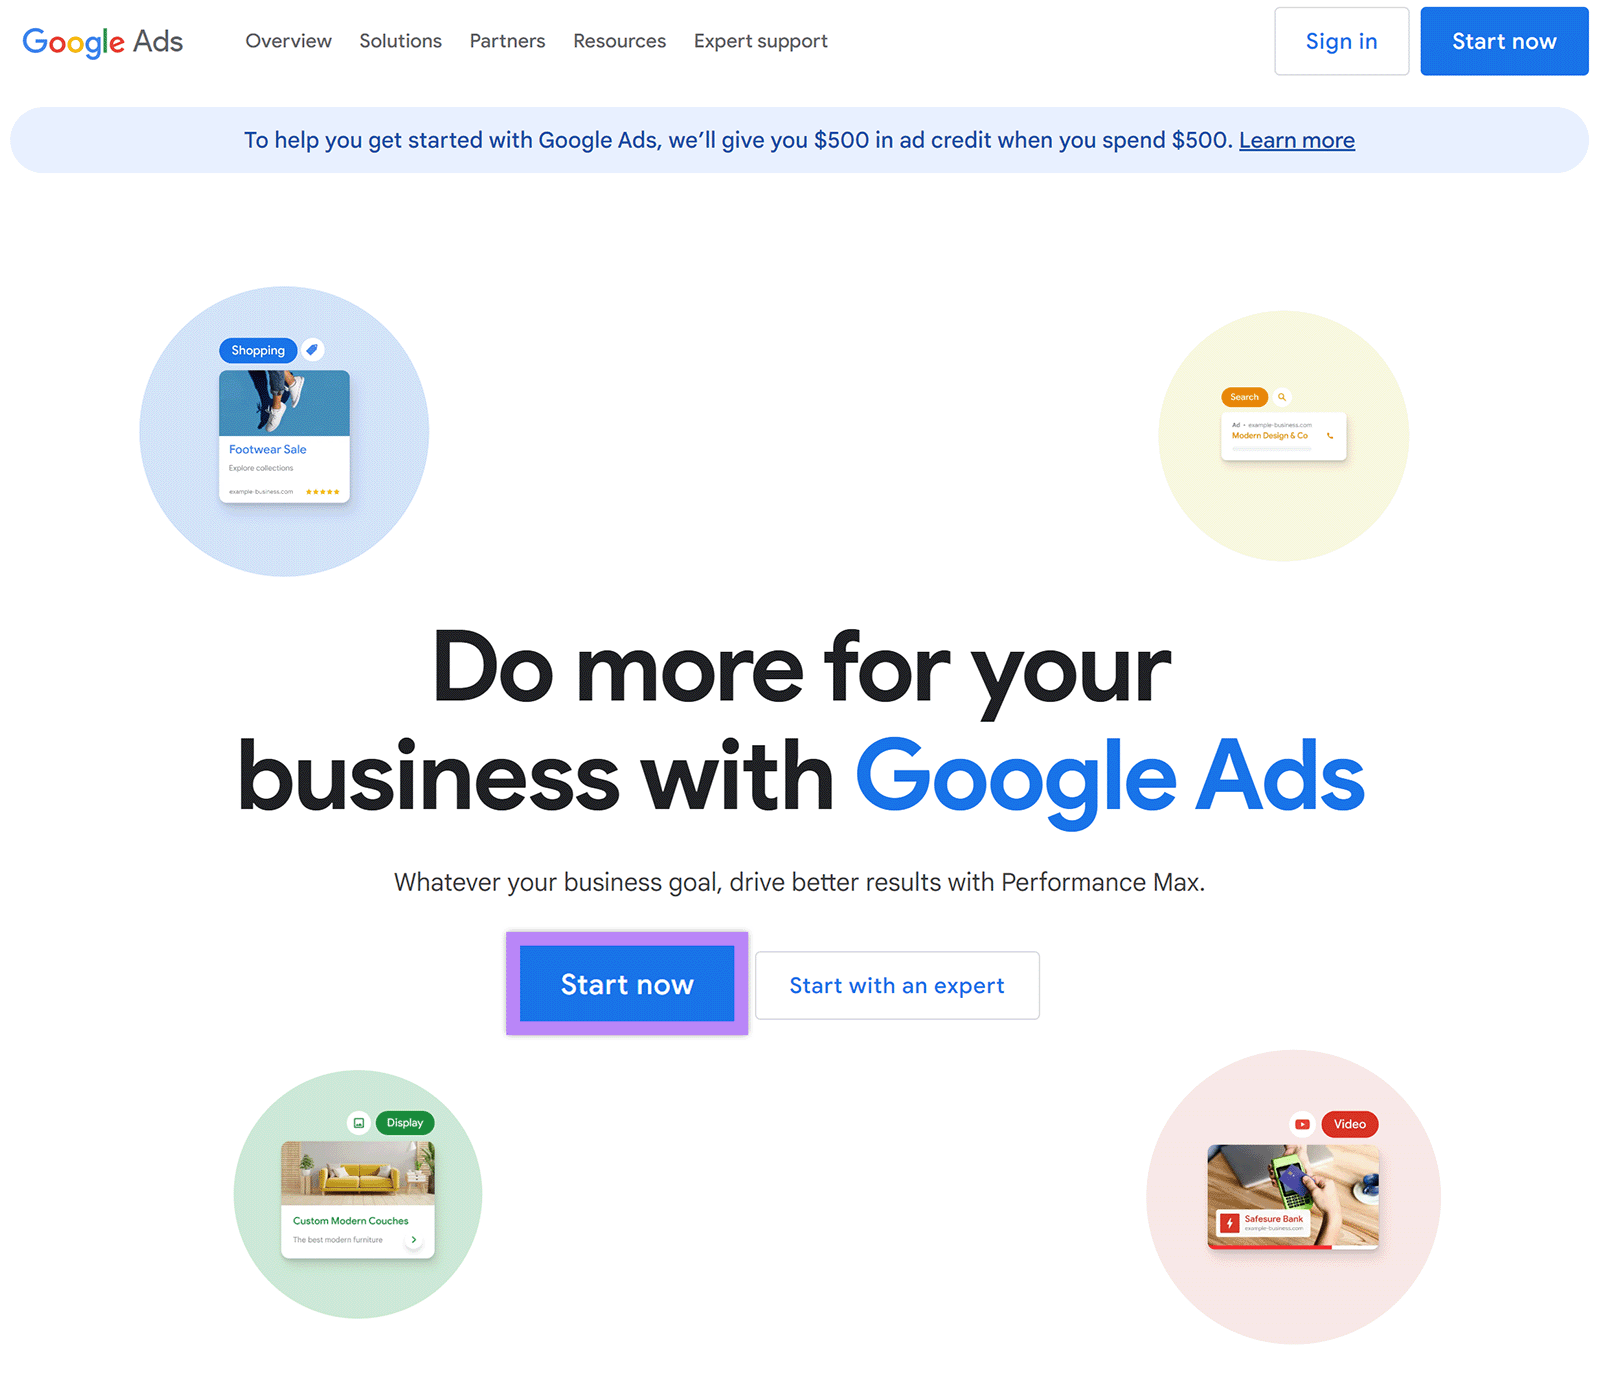 Google Ads landing page with Start Now button highlighted.